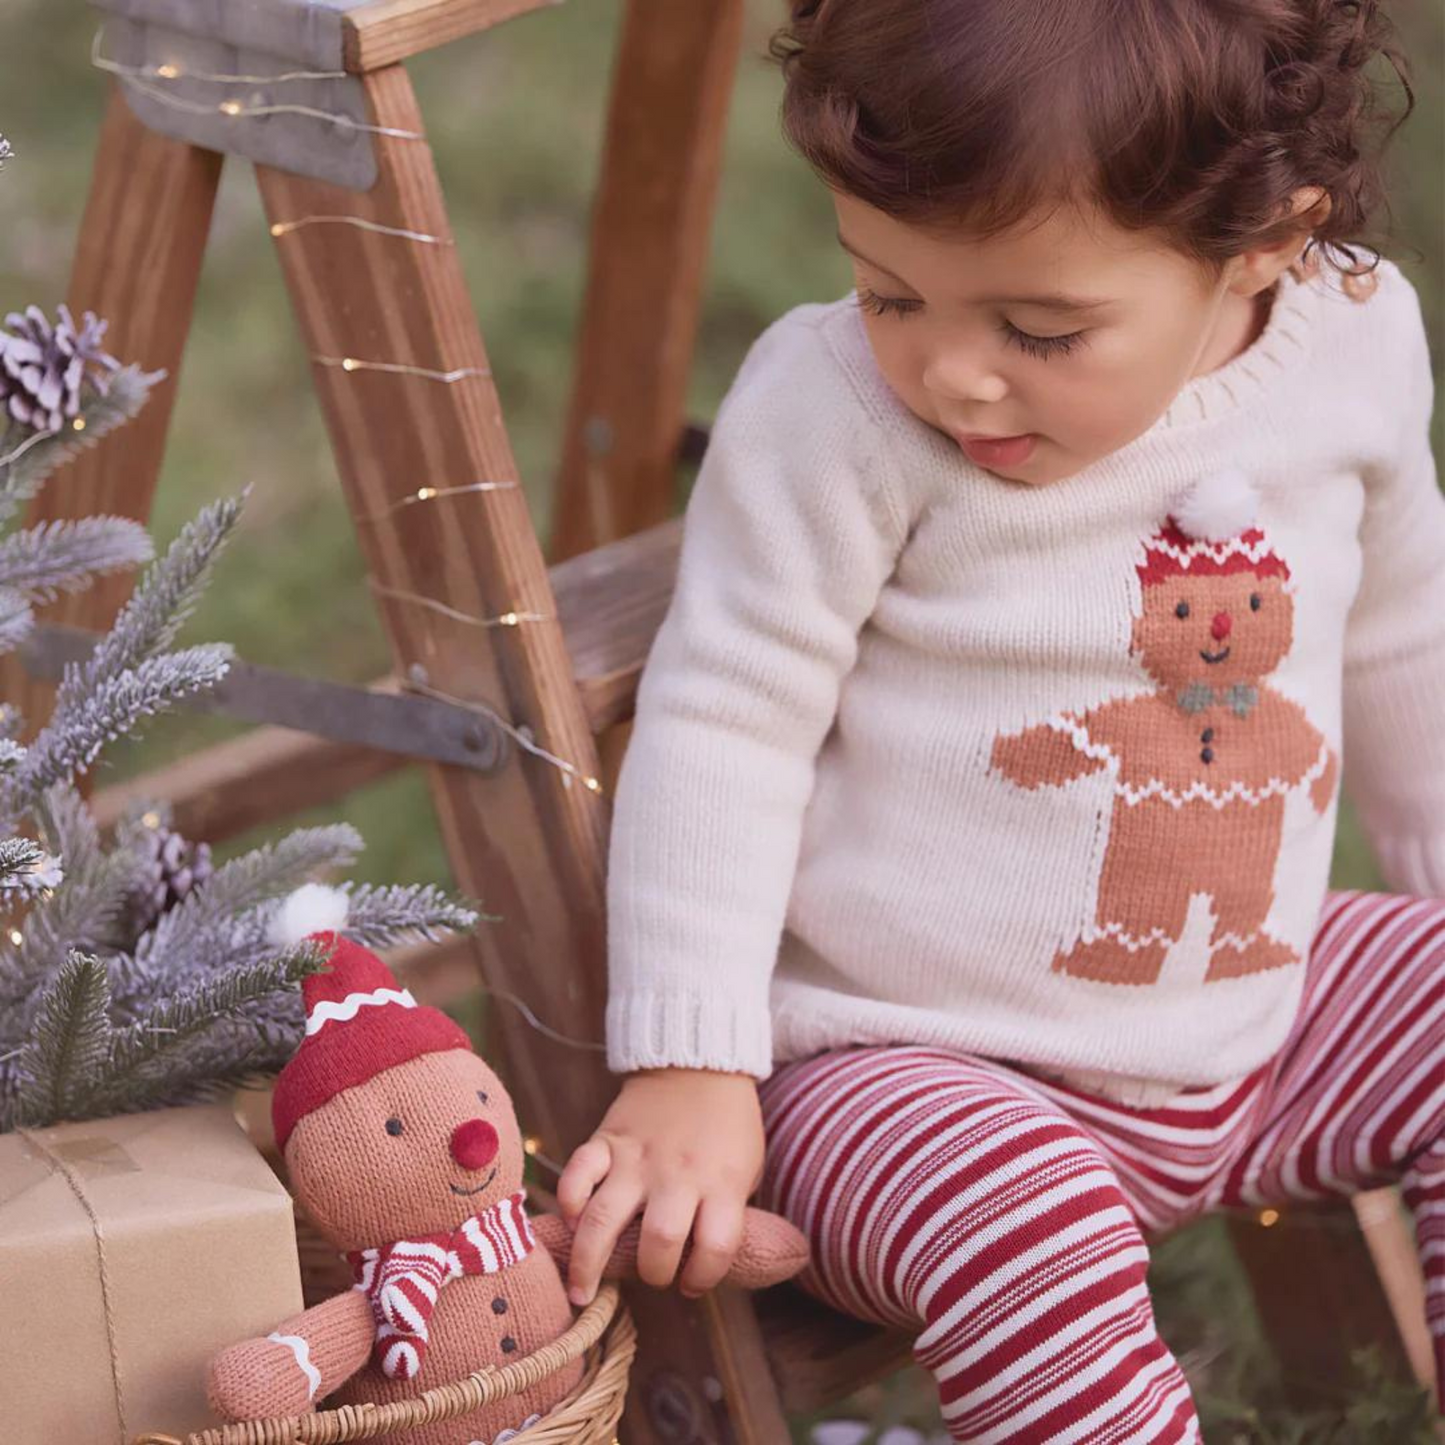 Gingerbread Pullover & Striped Pant + Red Hat Set